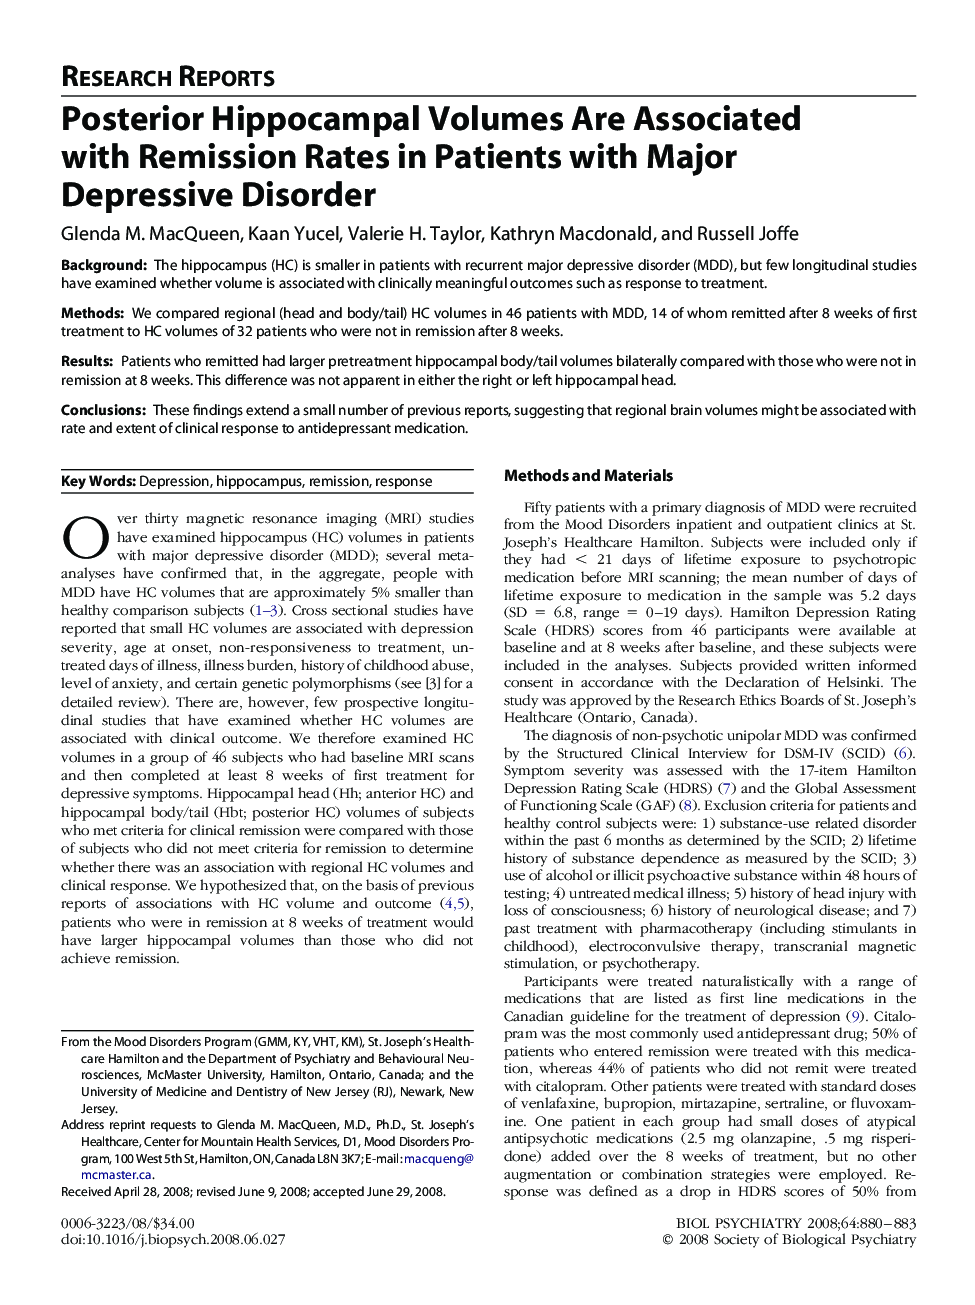 Posterior Hippocampal Volumes Are Associated with Remission Rates in Patients with Major Depressive Disorder